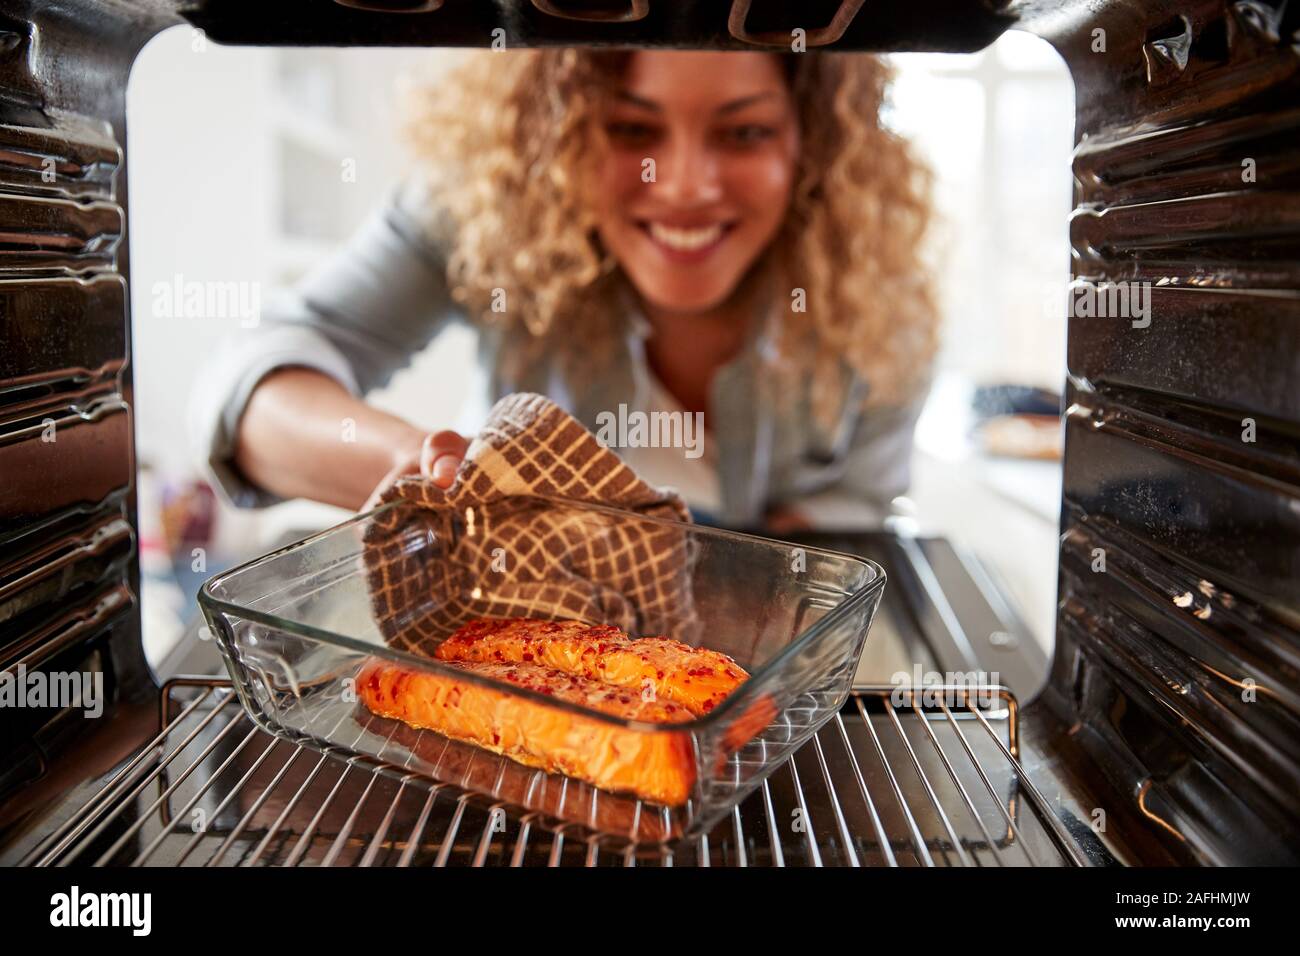 View Looking Out From Inside Oven As Woman Cooks Oven Baked Salmon Stock Photo